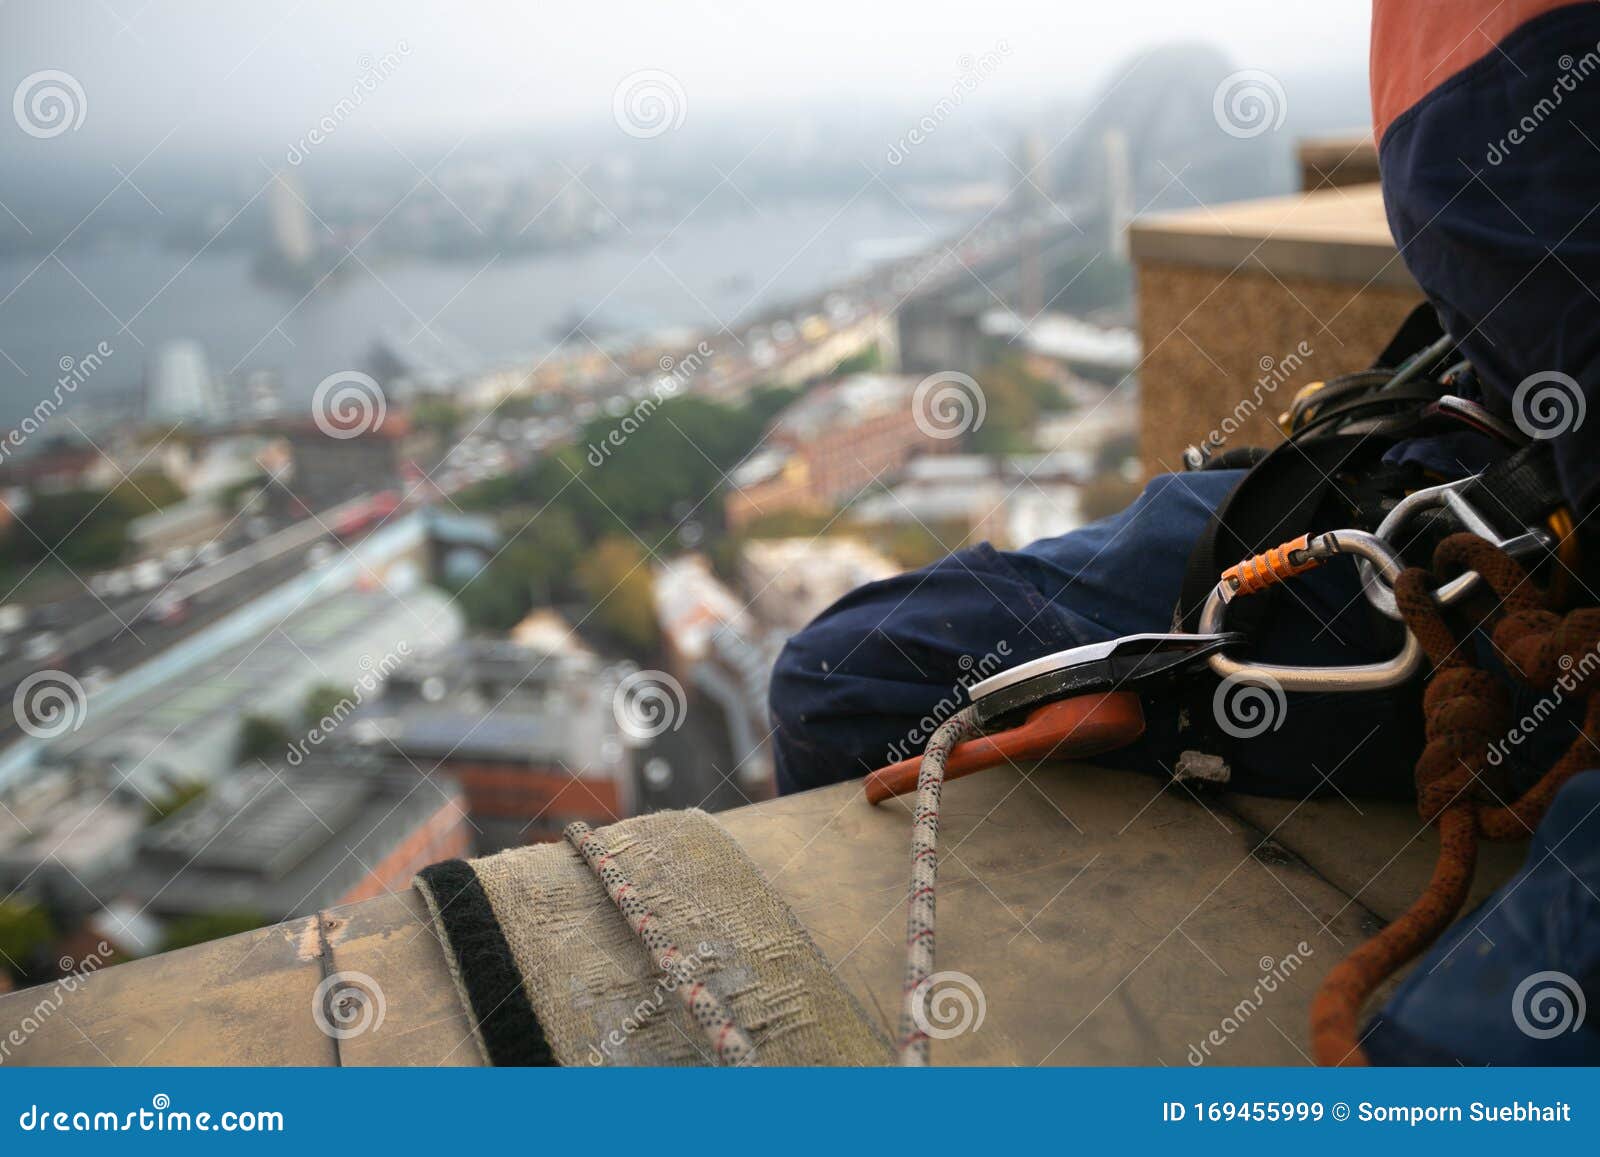 rope access abseiler sitting over high rise building edge having hardware descender device clipping on 10.5 mm dynamic low stretch